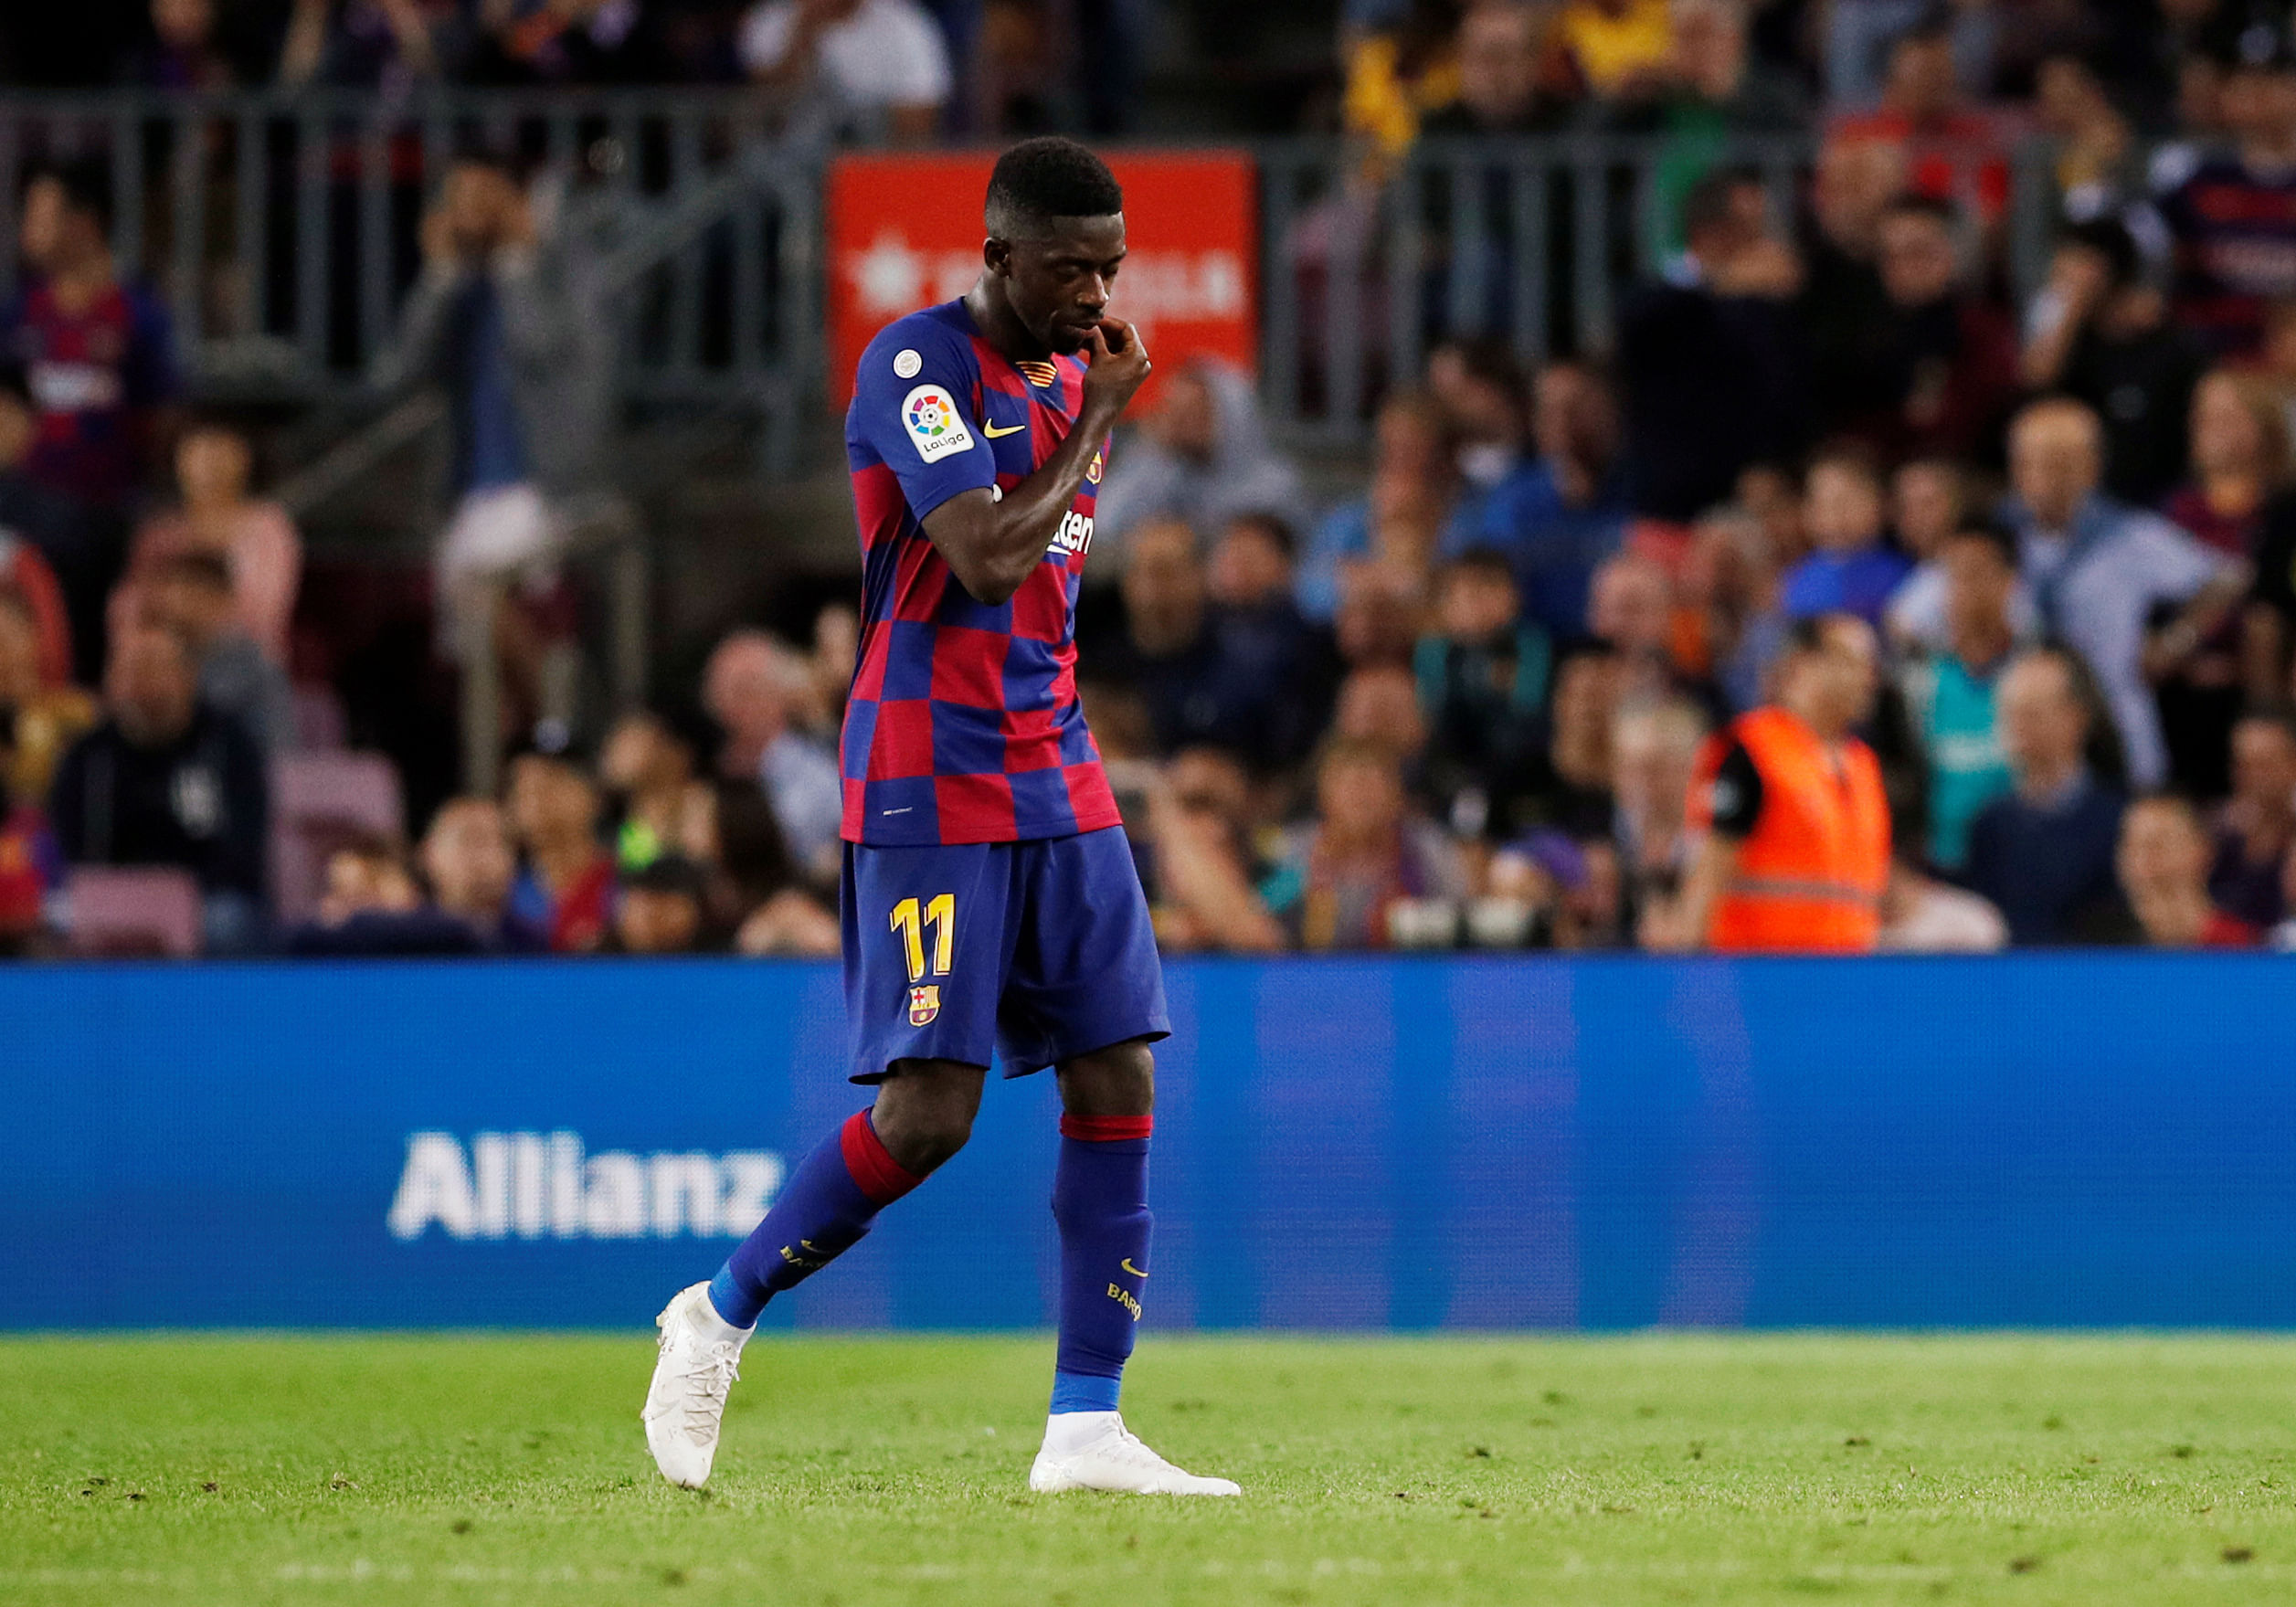 Barcelona's Ousmane Dembele after being sent off by referee Antonio Mateu Lahoz. (Reuters Photo)